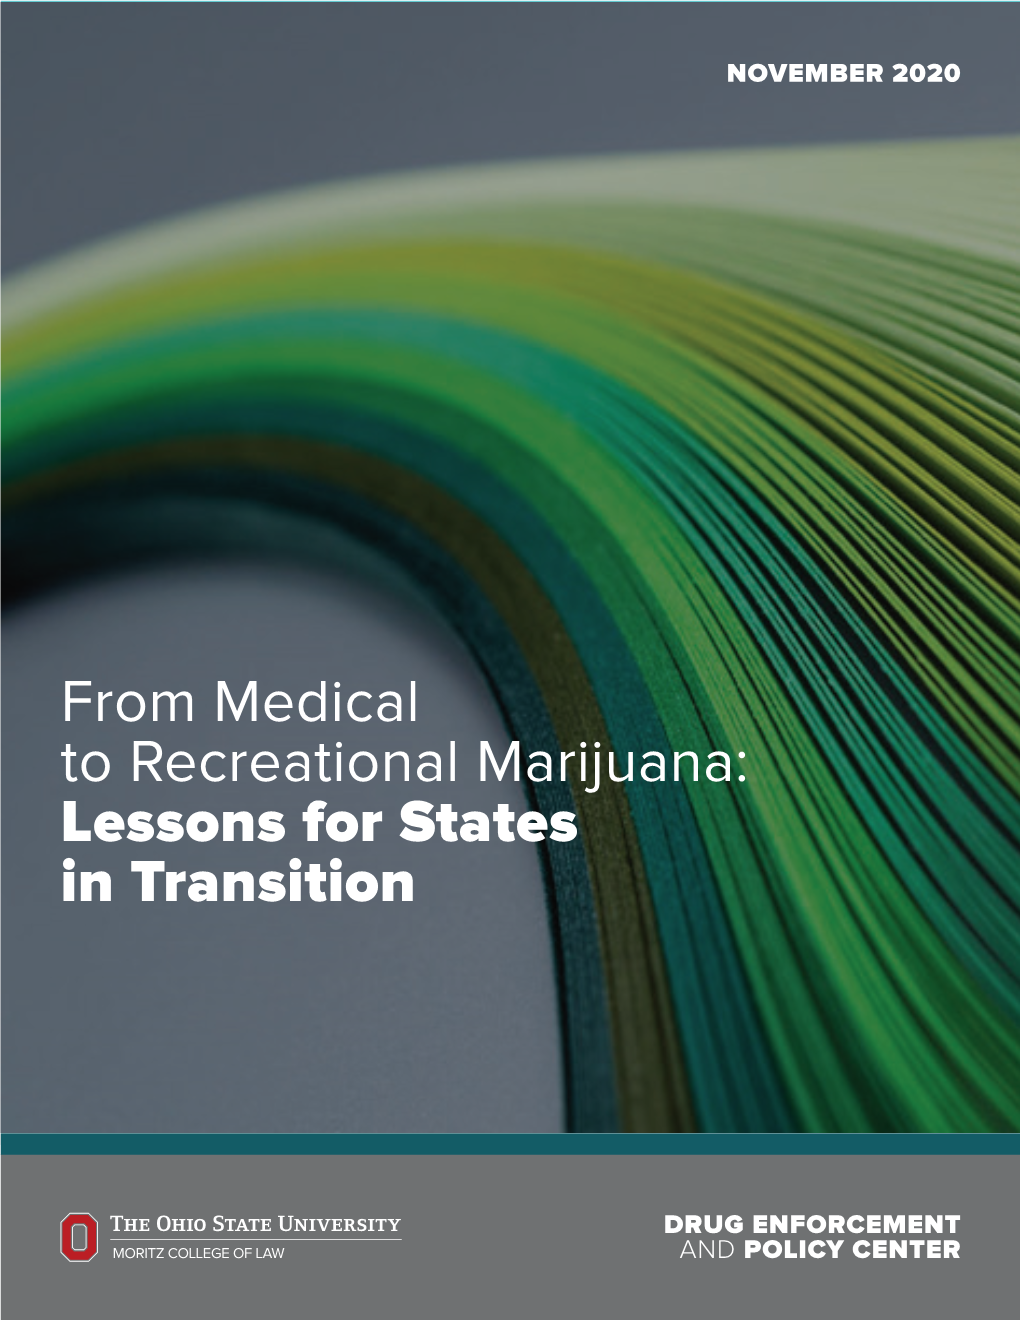 From Medical to Recreational Marijuana: Lessons for States in Transition